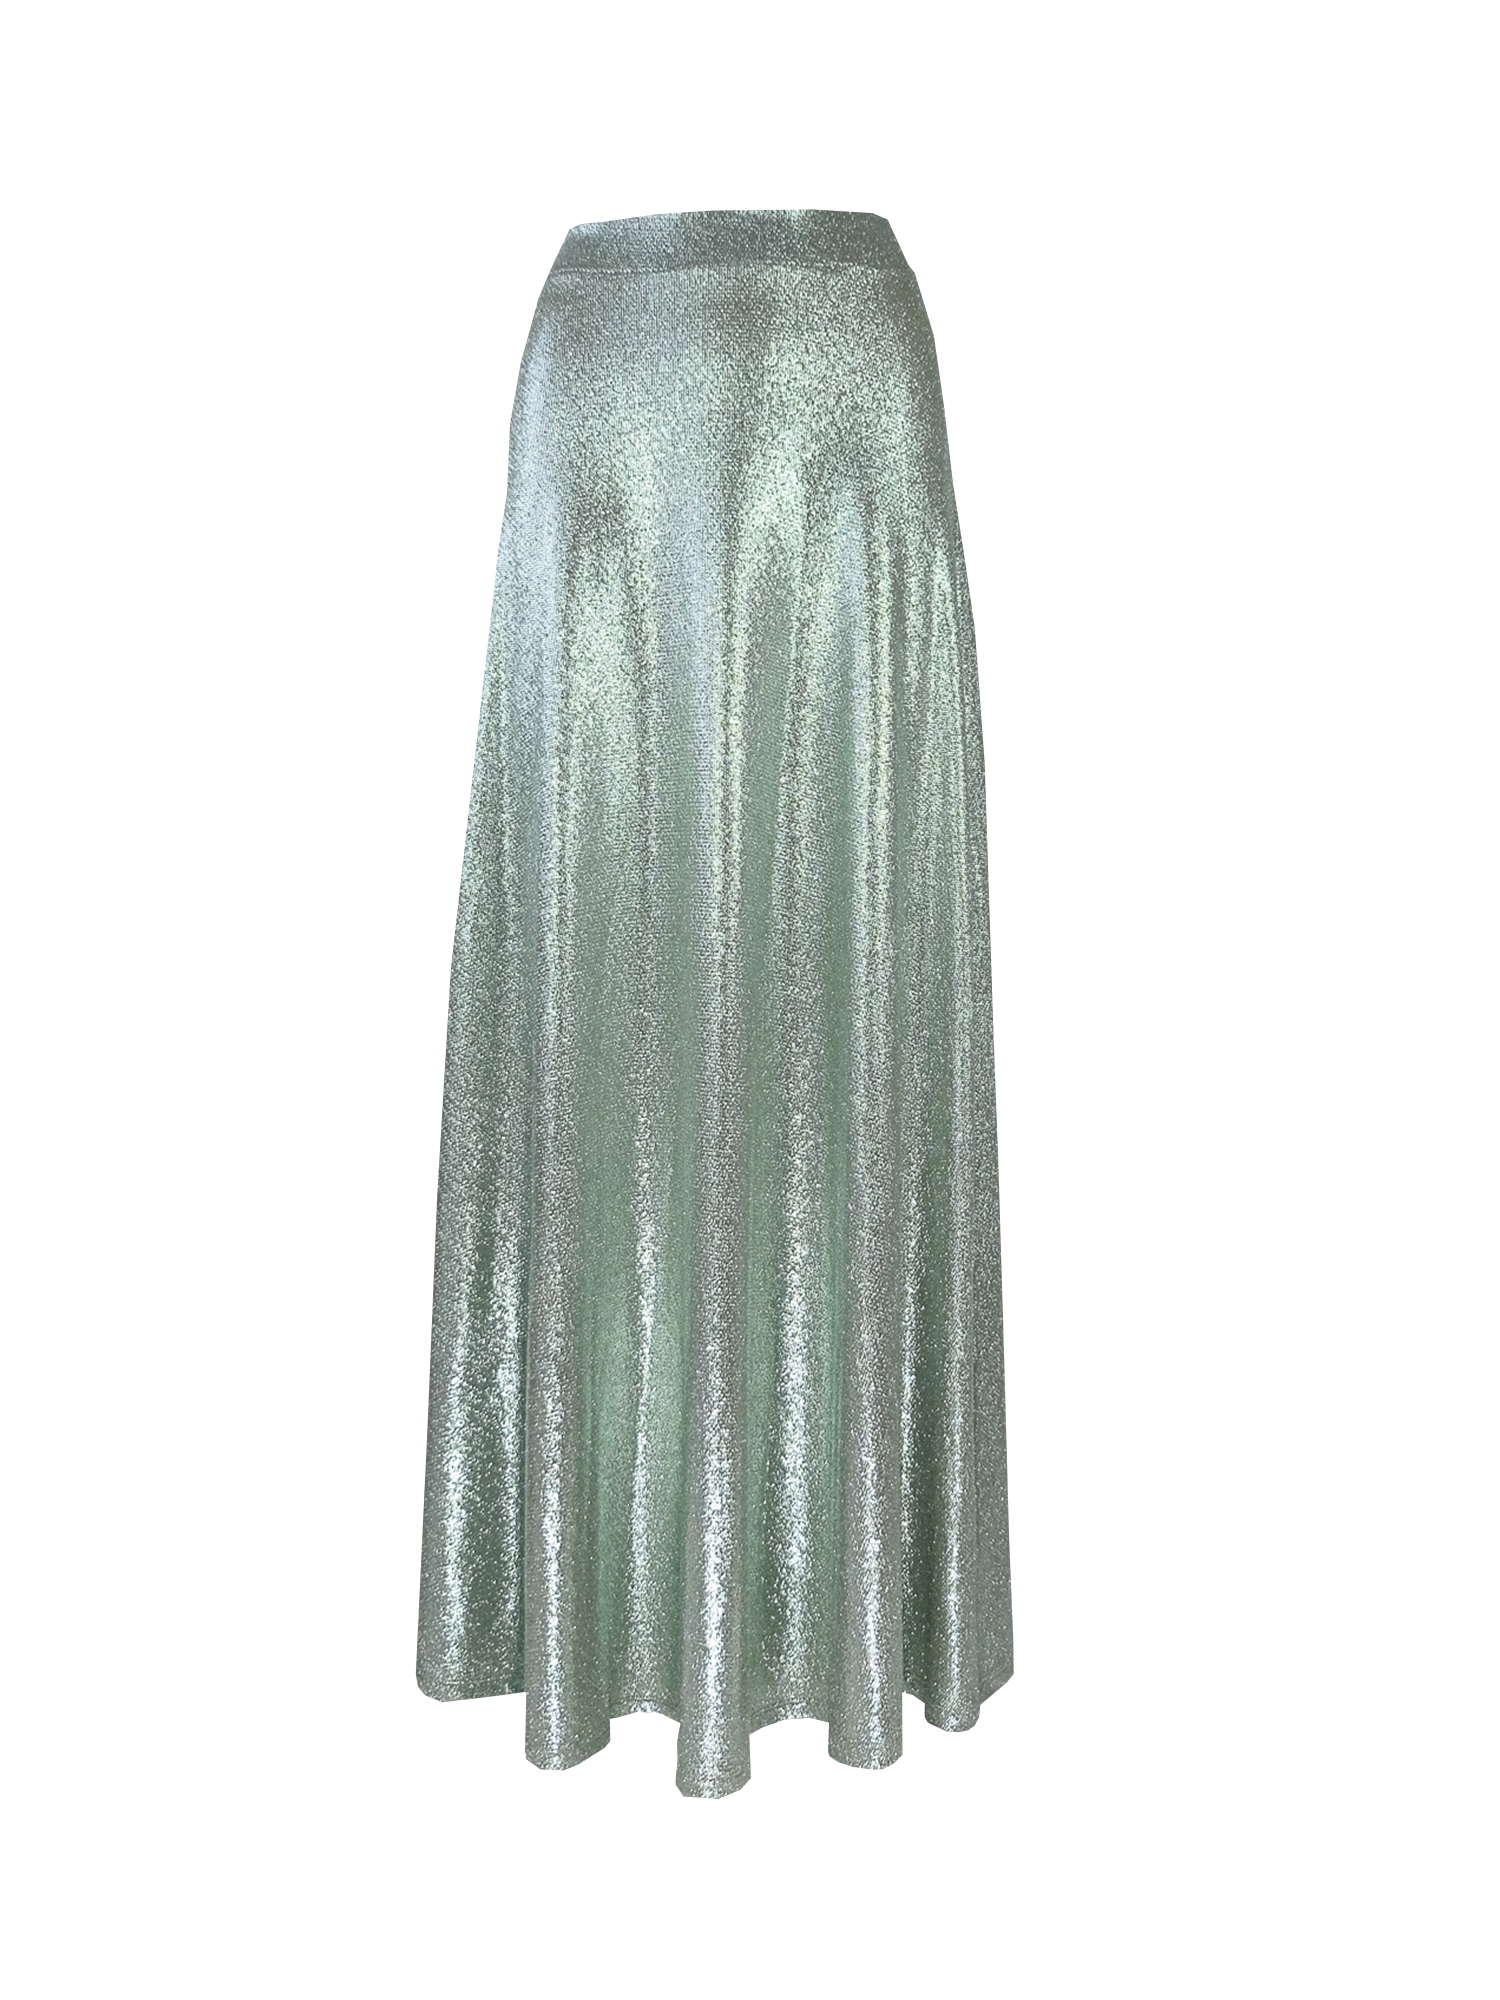 TOSCA - long skirt in pale green lurex